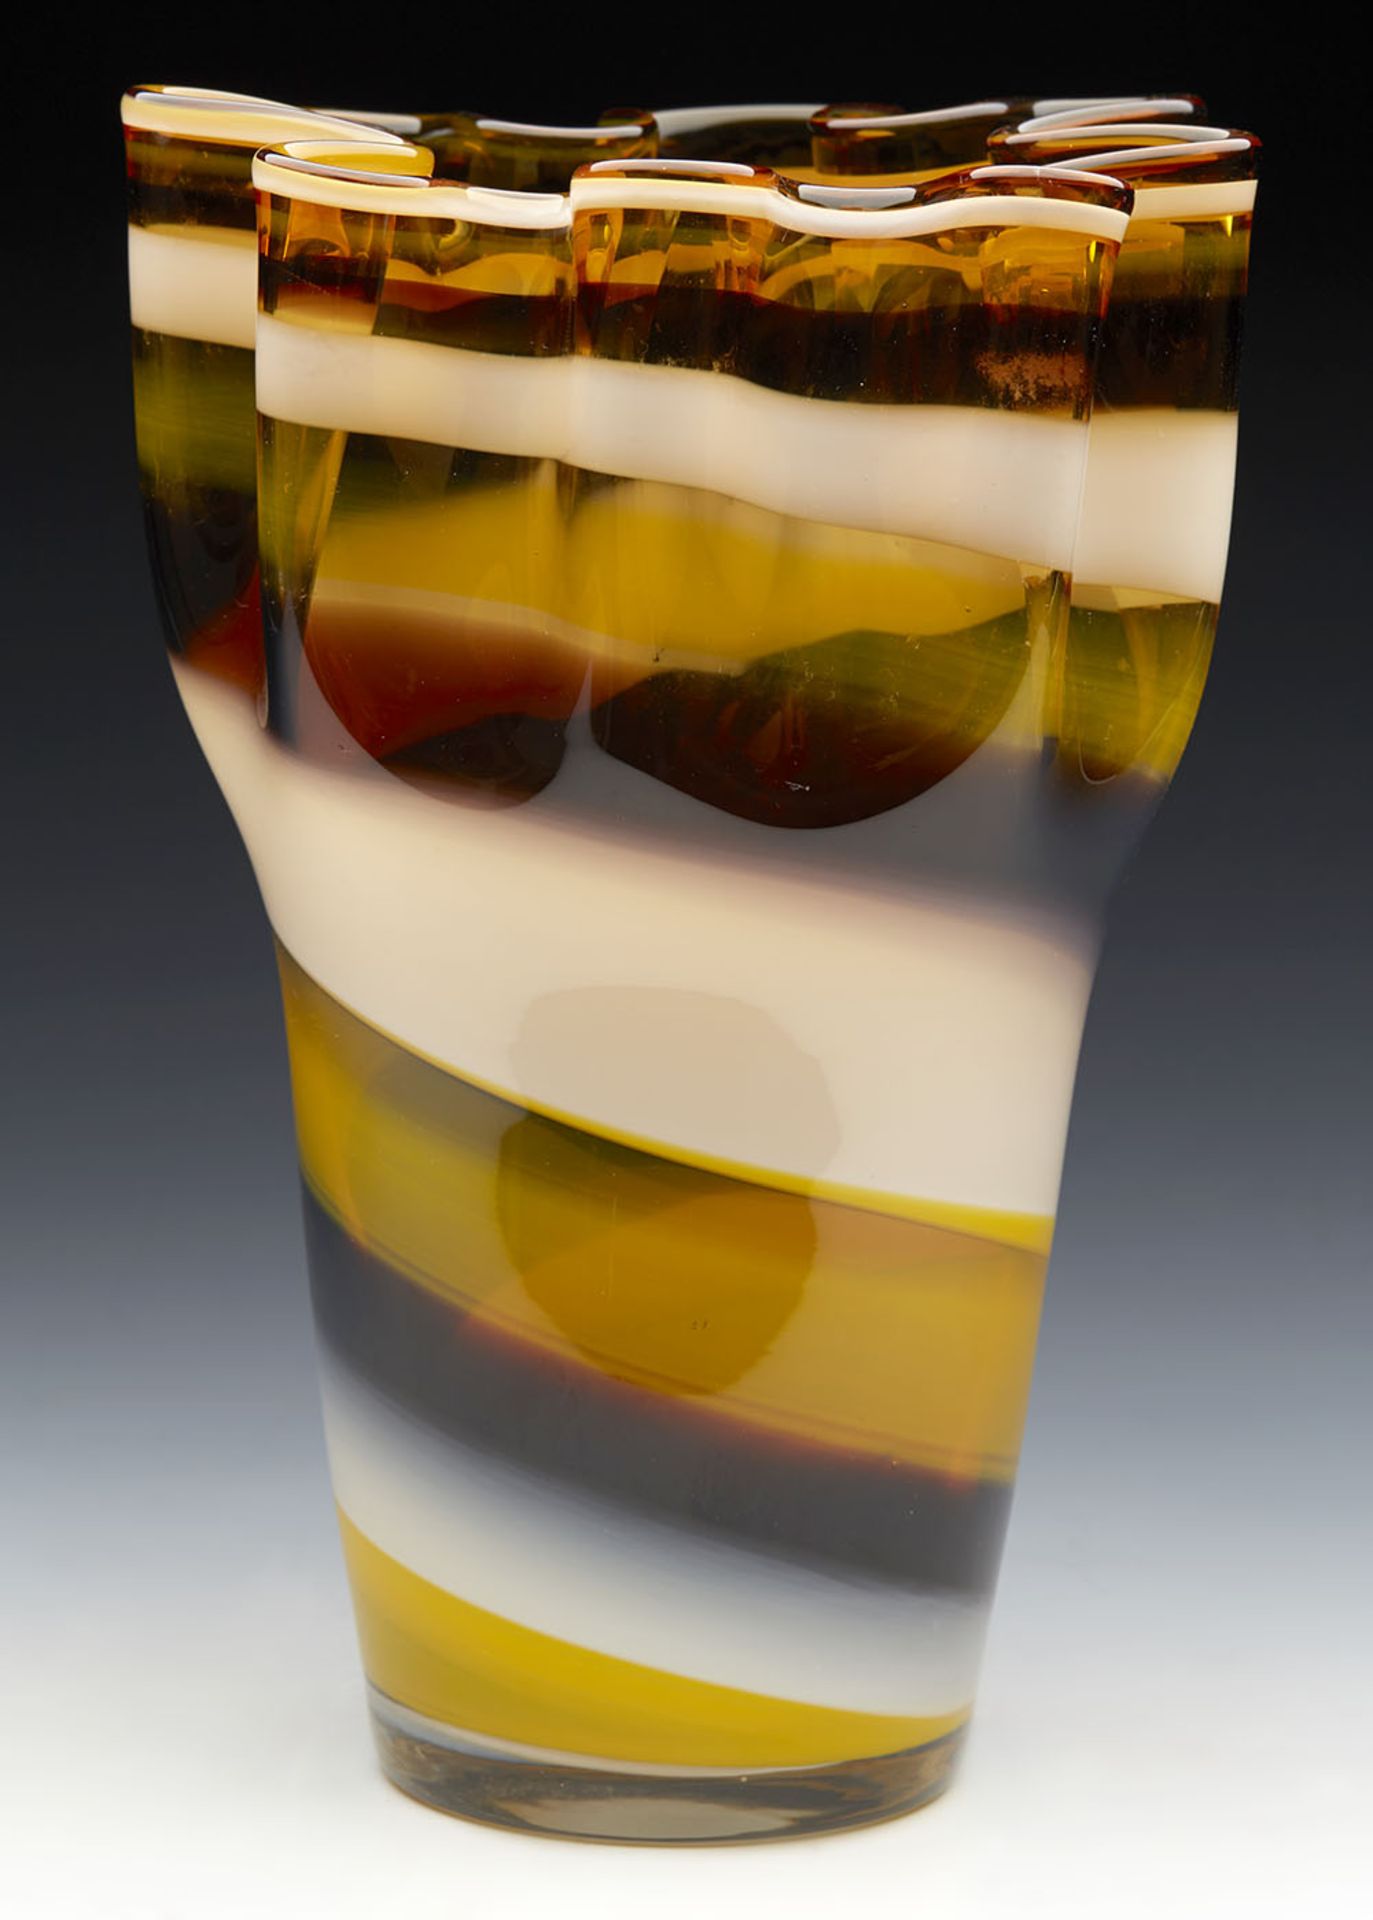 Vintage Italian Art Glass Vase With Fazzoletto Top 20Th C. - Image 9 of 9